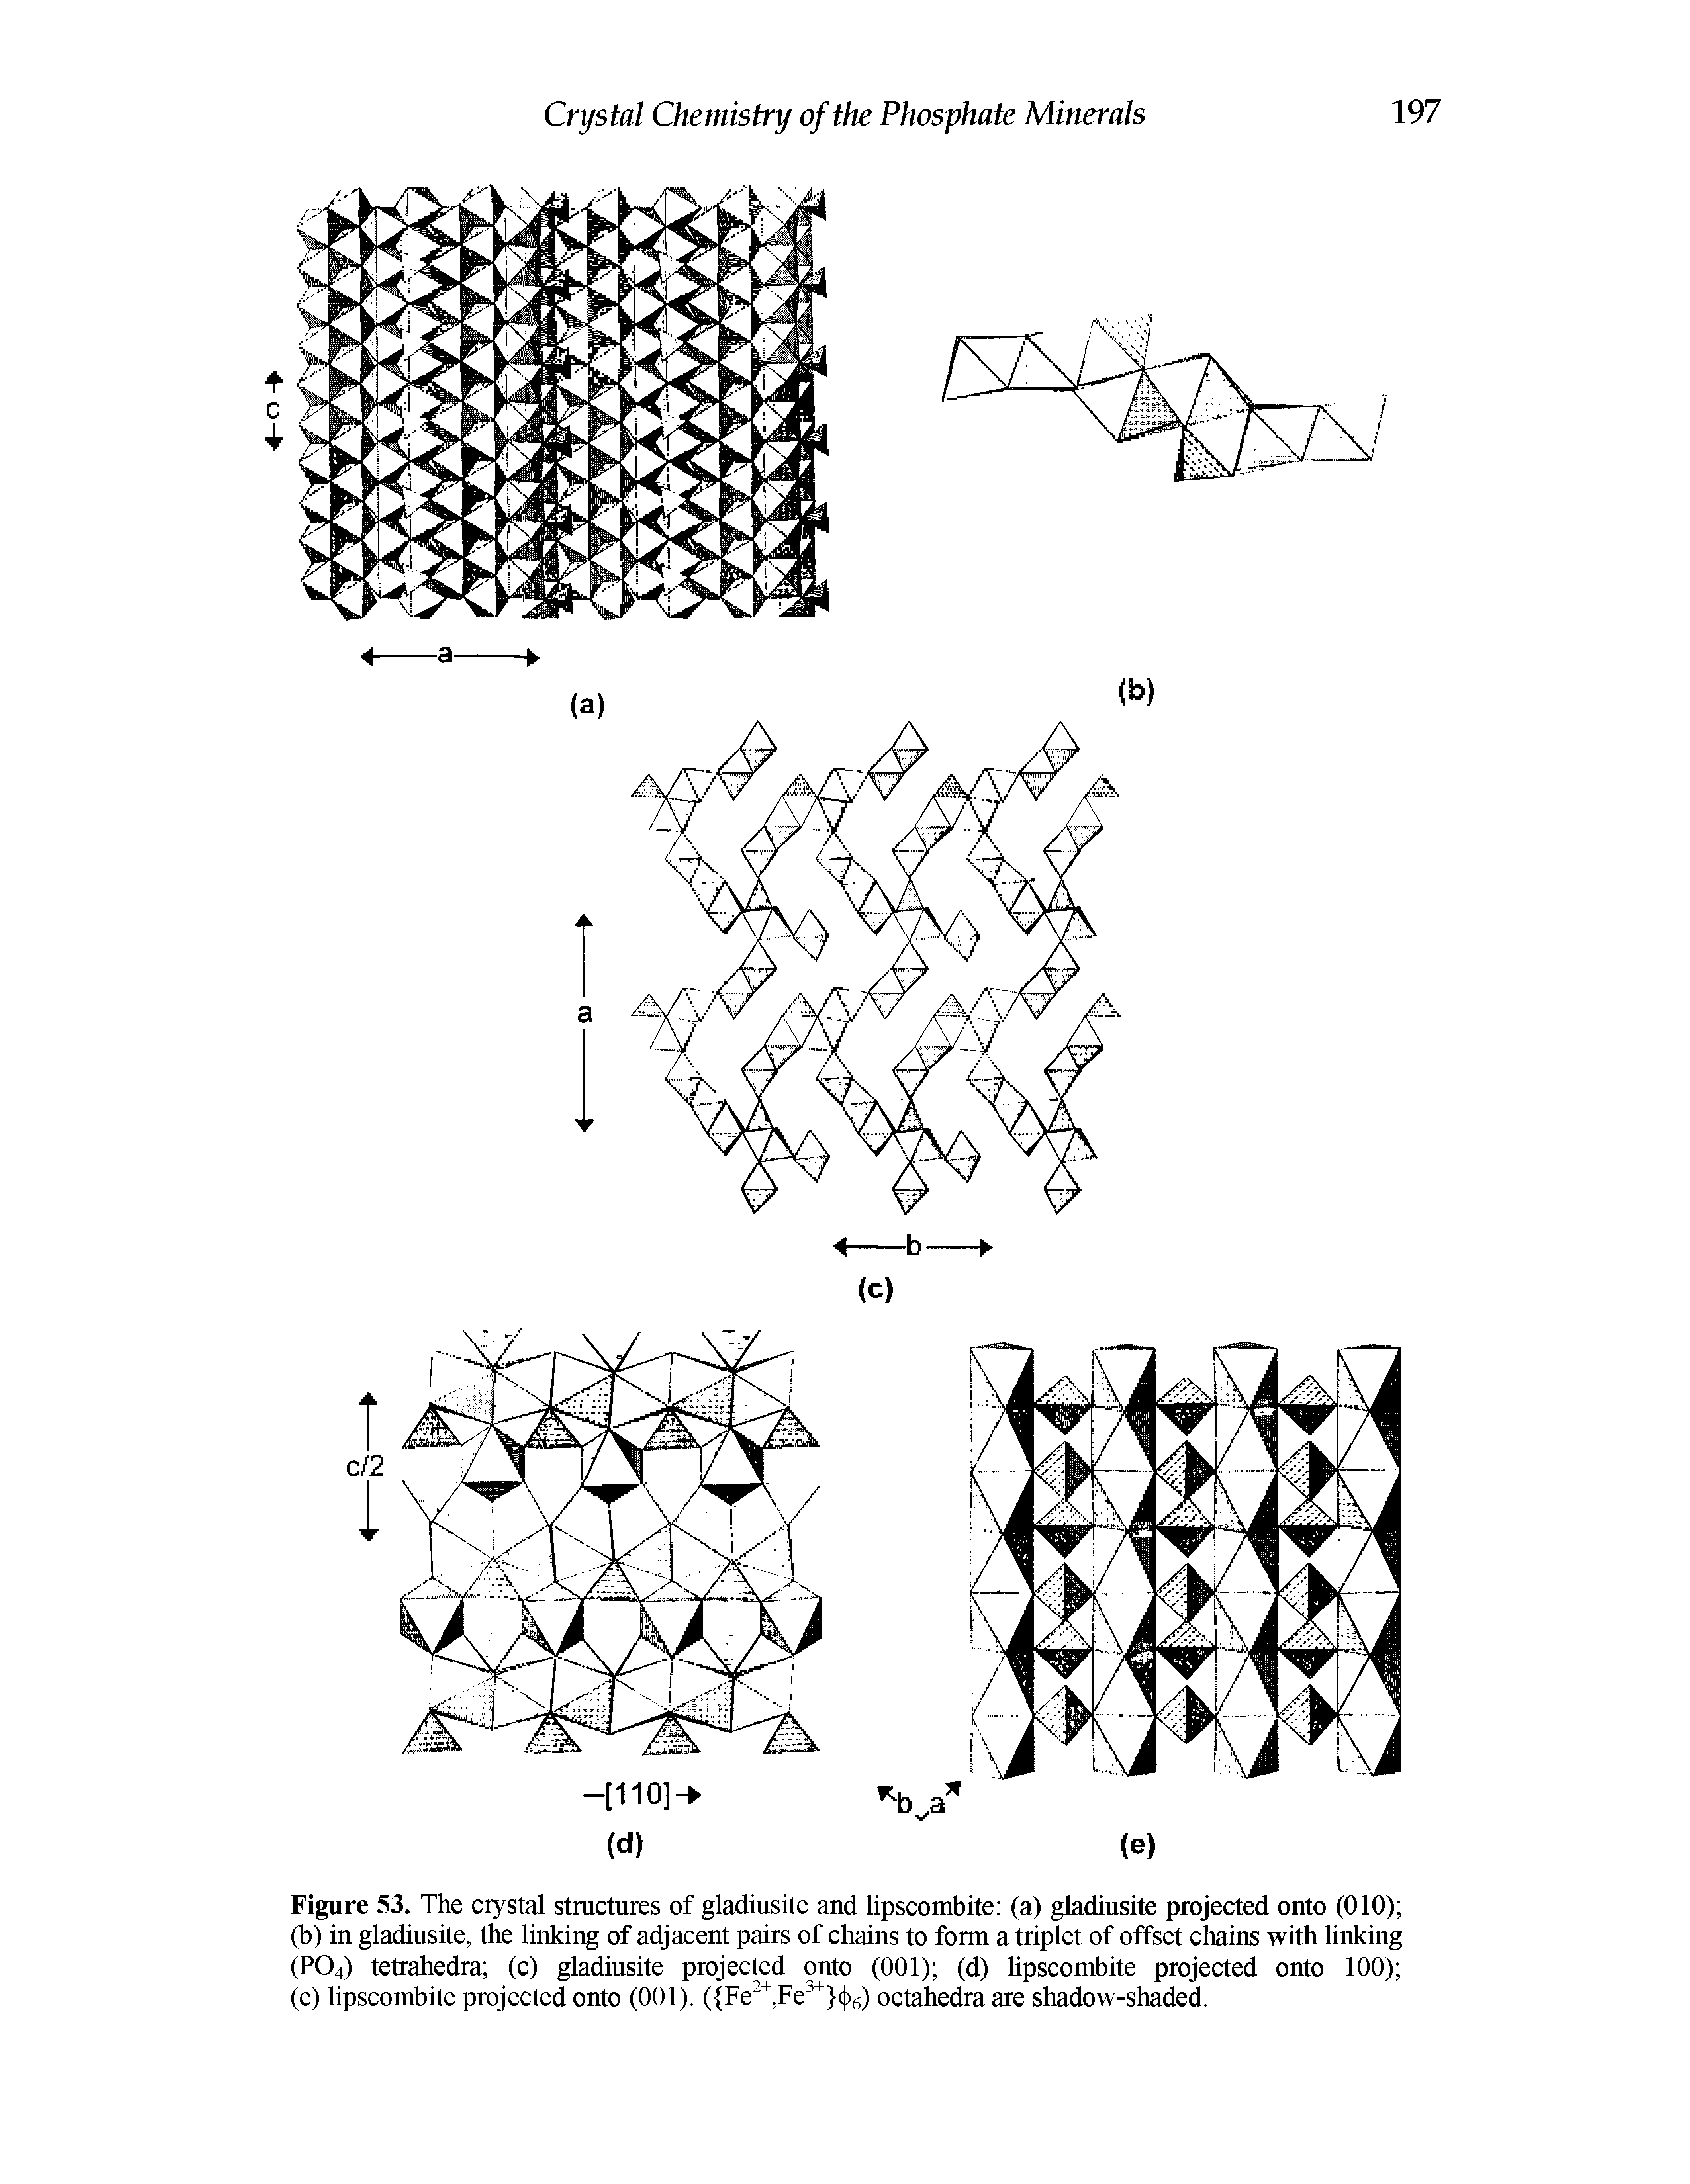 Figure 53. The crystal structures of gladiusite and lipscombite (a) gladiusite projected onto (010) (b) in gladiusite, the linking of adjacent pairs of chains to form a triplet of offset chains with Unking (PO4) tetrahedra (c) gladiusite projected onto (001) (d) lipscombite projected onto 100) (e) lipscombite projected onto (001). ( Fe, Fe c )6) octahedra are shadow-shaded.